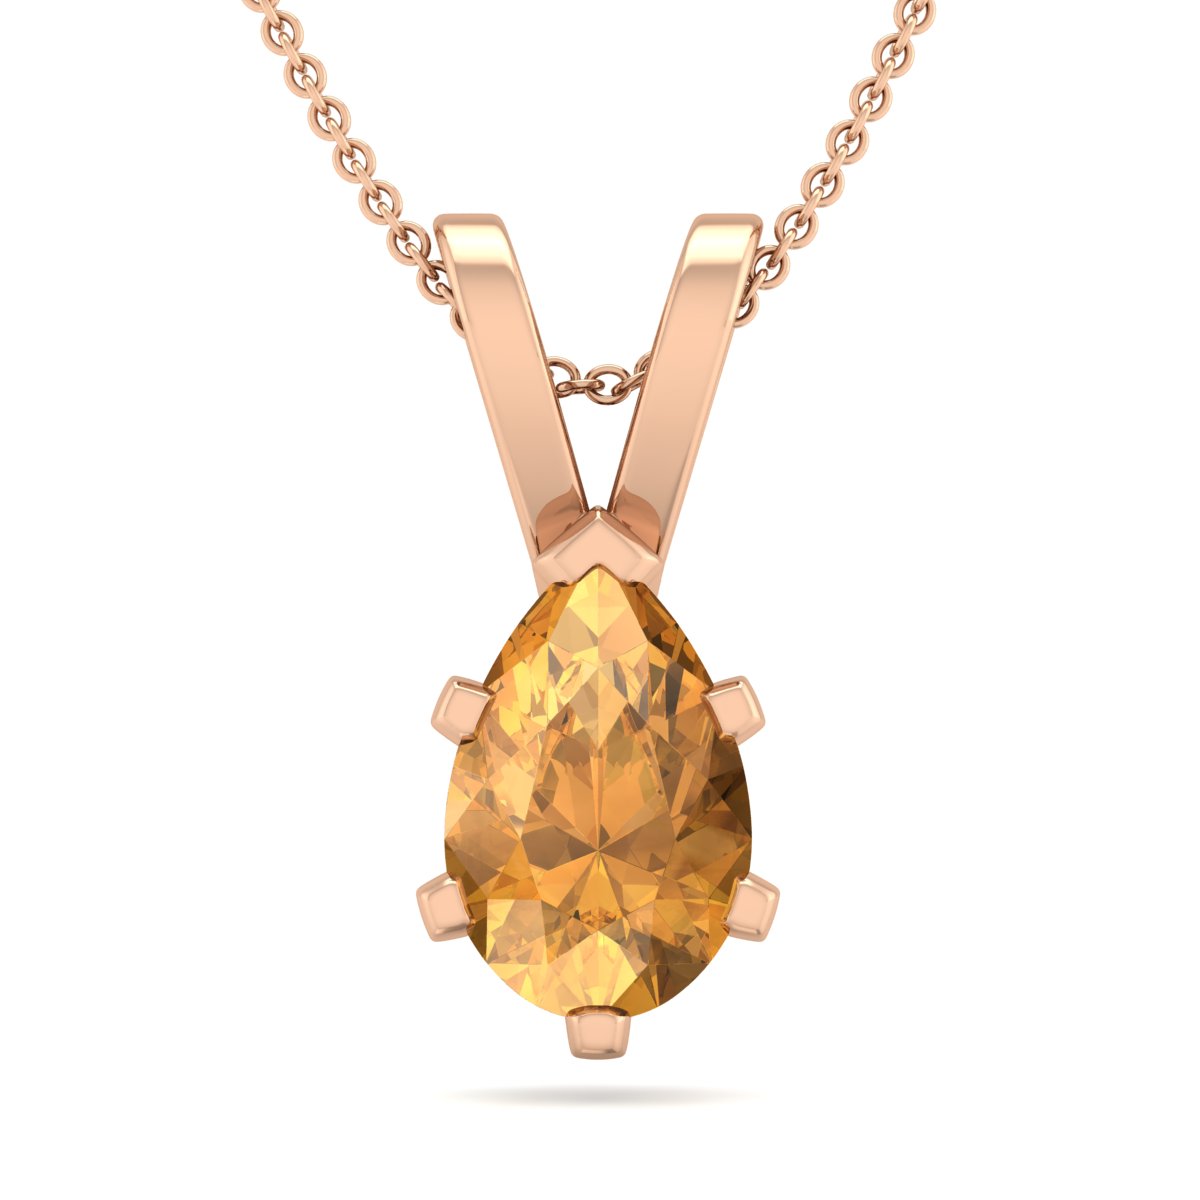 Sselects 3/4 Carat Pear Shape Citrine Necklace In 14k Rose Gold Over Sterling In Silver